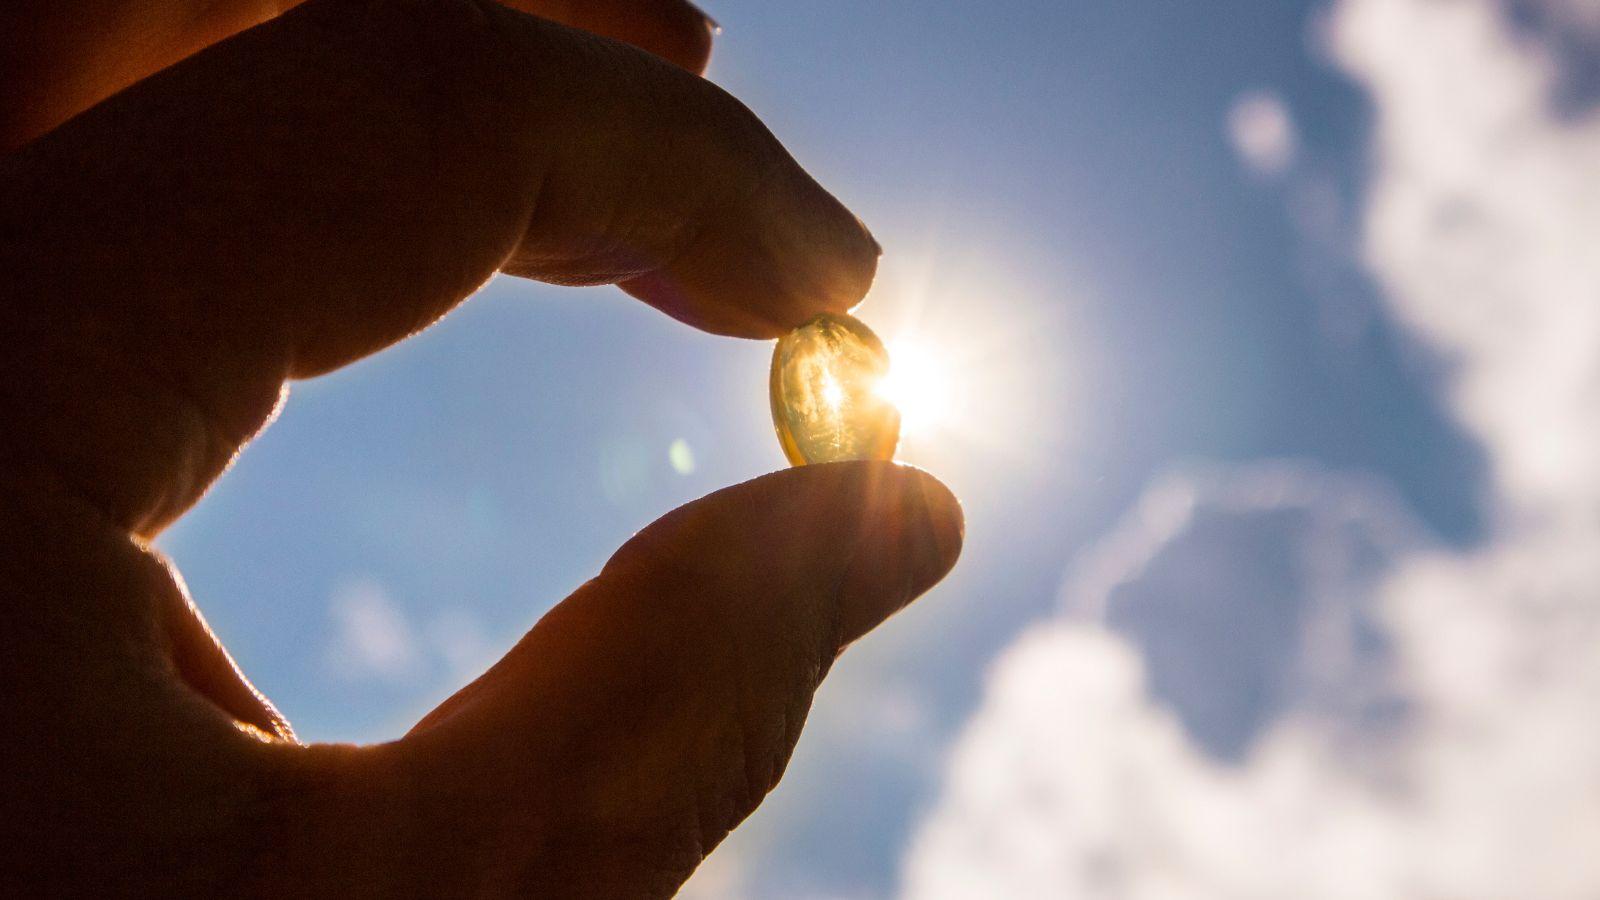 autumn self care tips vitamin d. Image of vitamin d capsule being held up to the sunlight. With clouds in the background and a blue sky